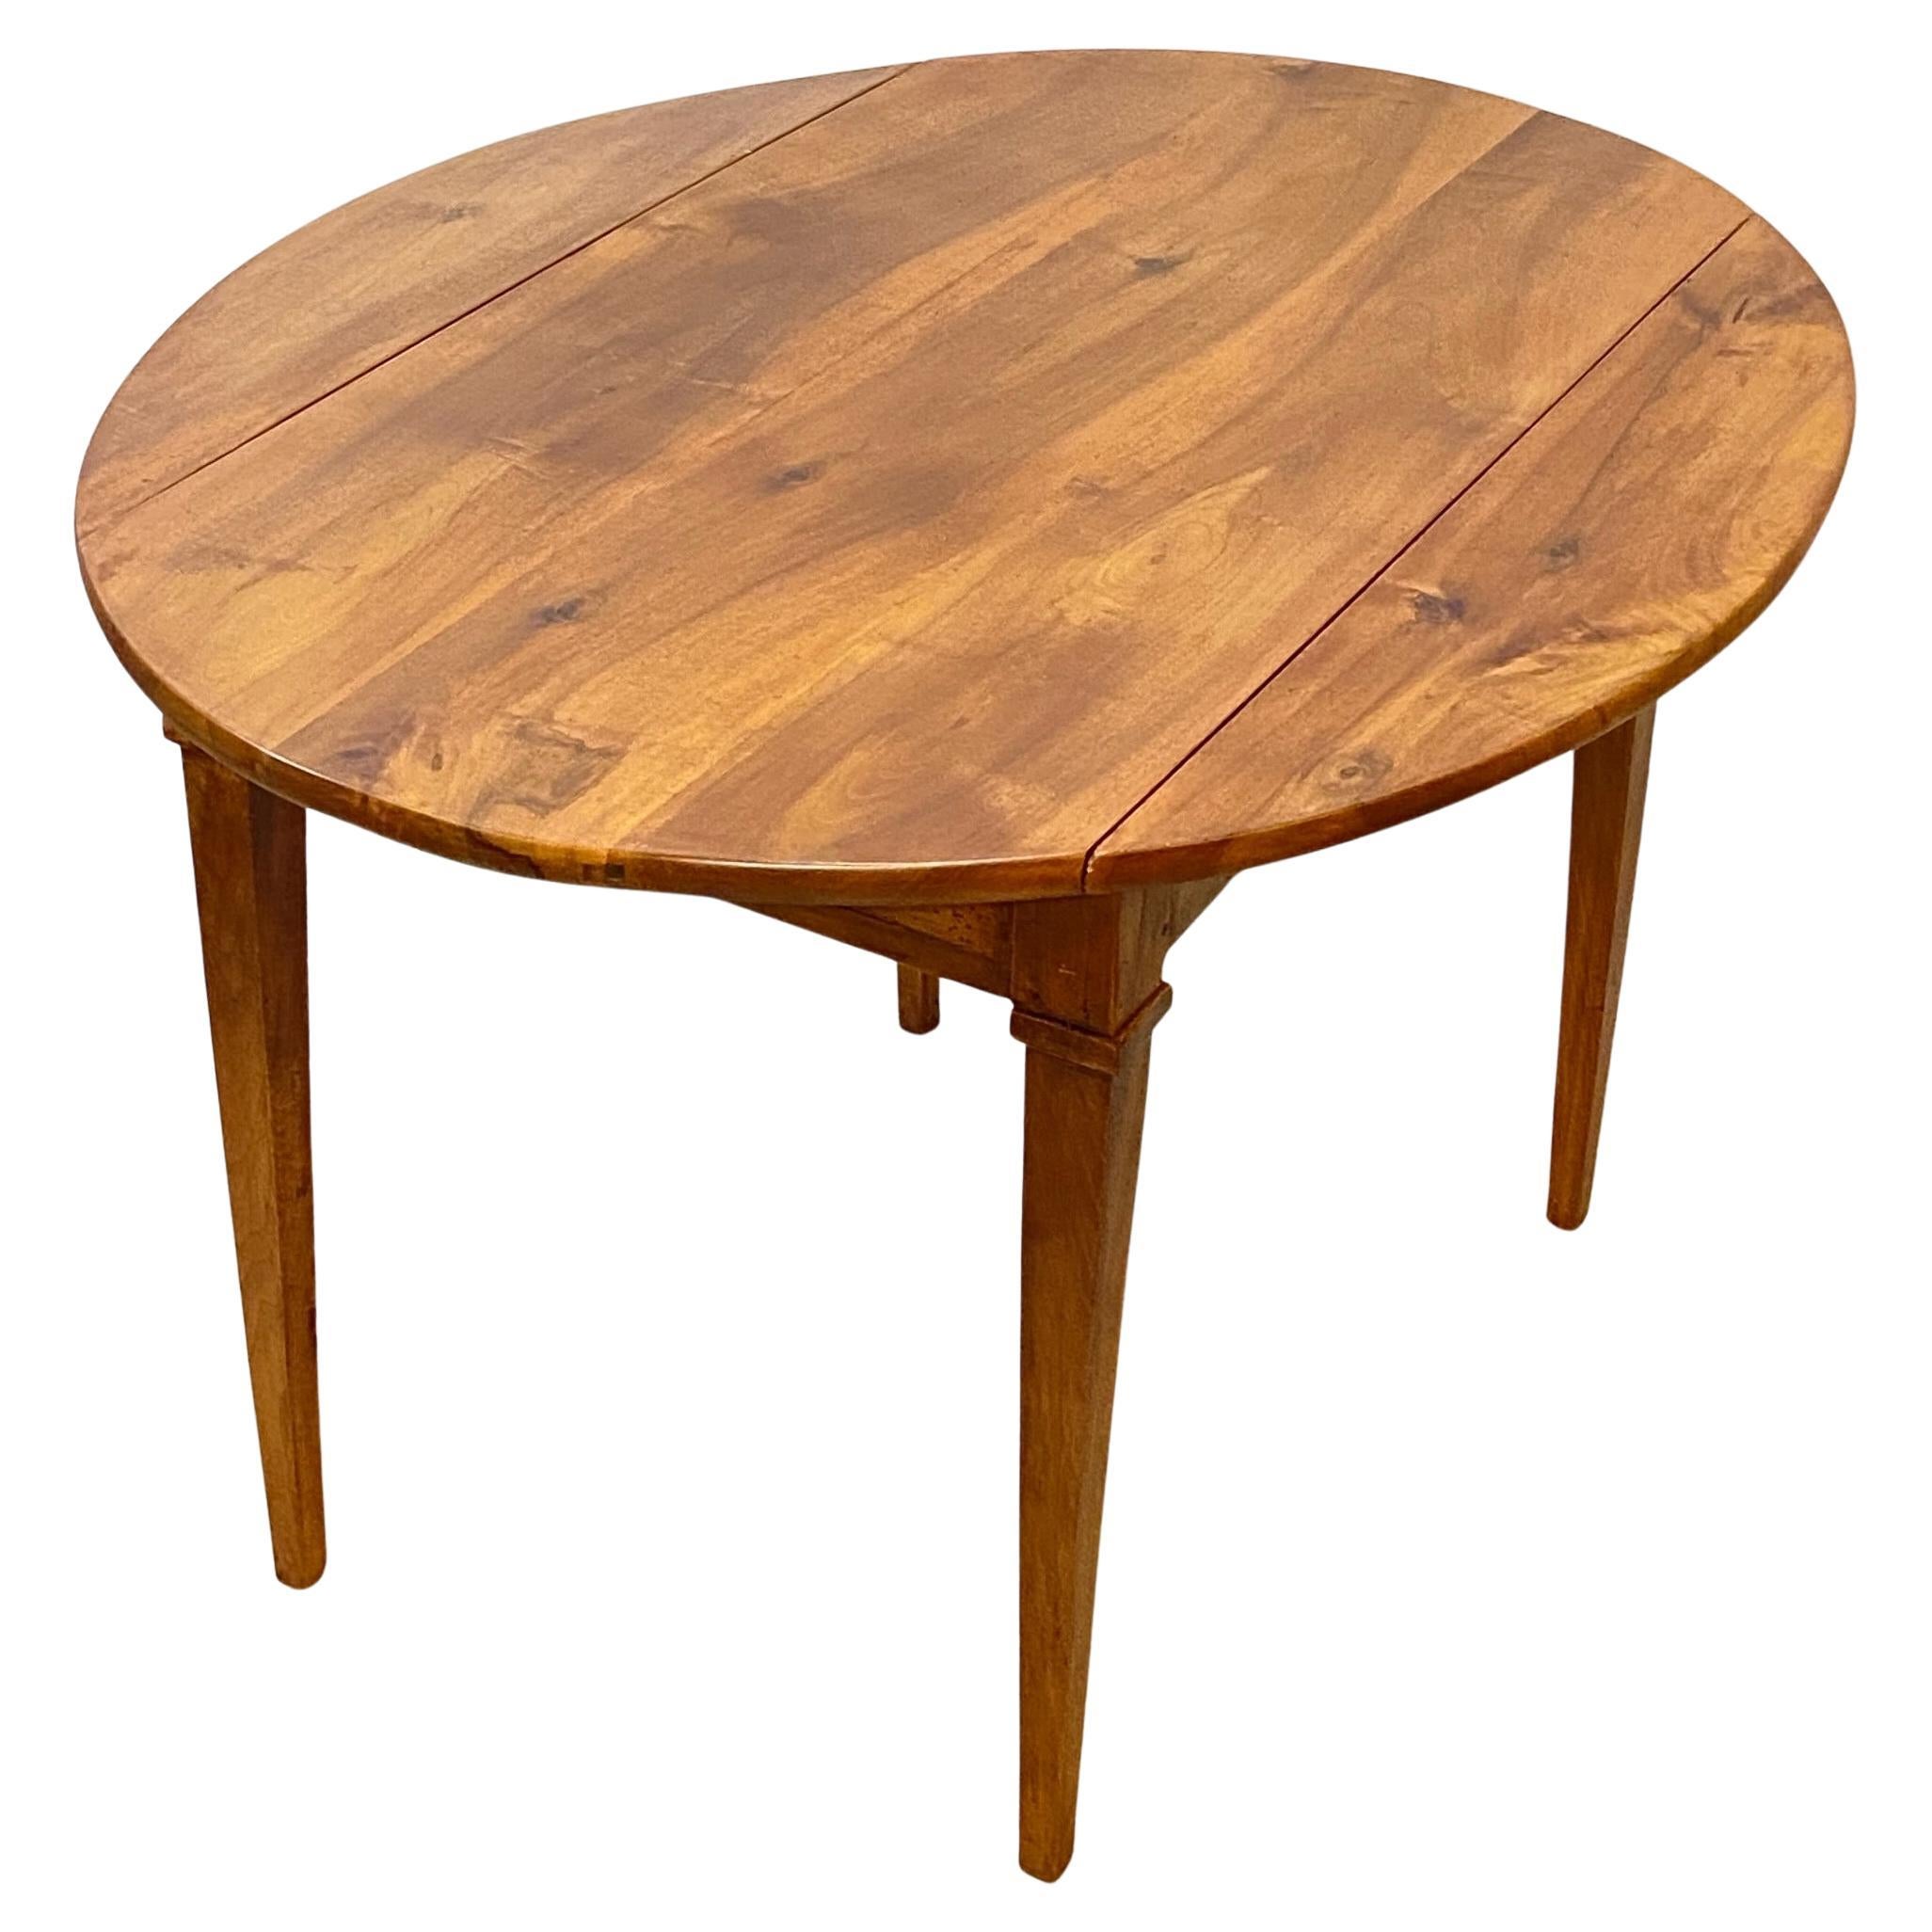 Early 19th C French Cherry Wood Elliptical Drop Leaf Dining Table, circa  1800 For Sale at 1stDibs